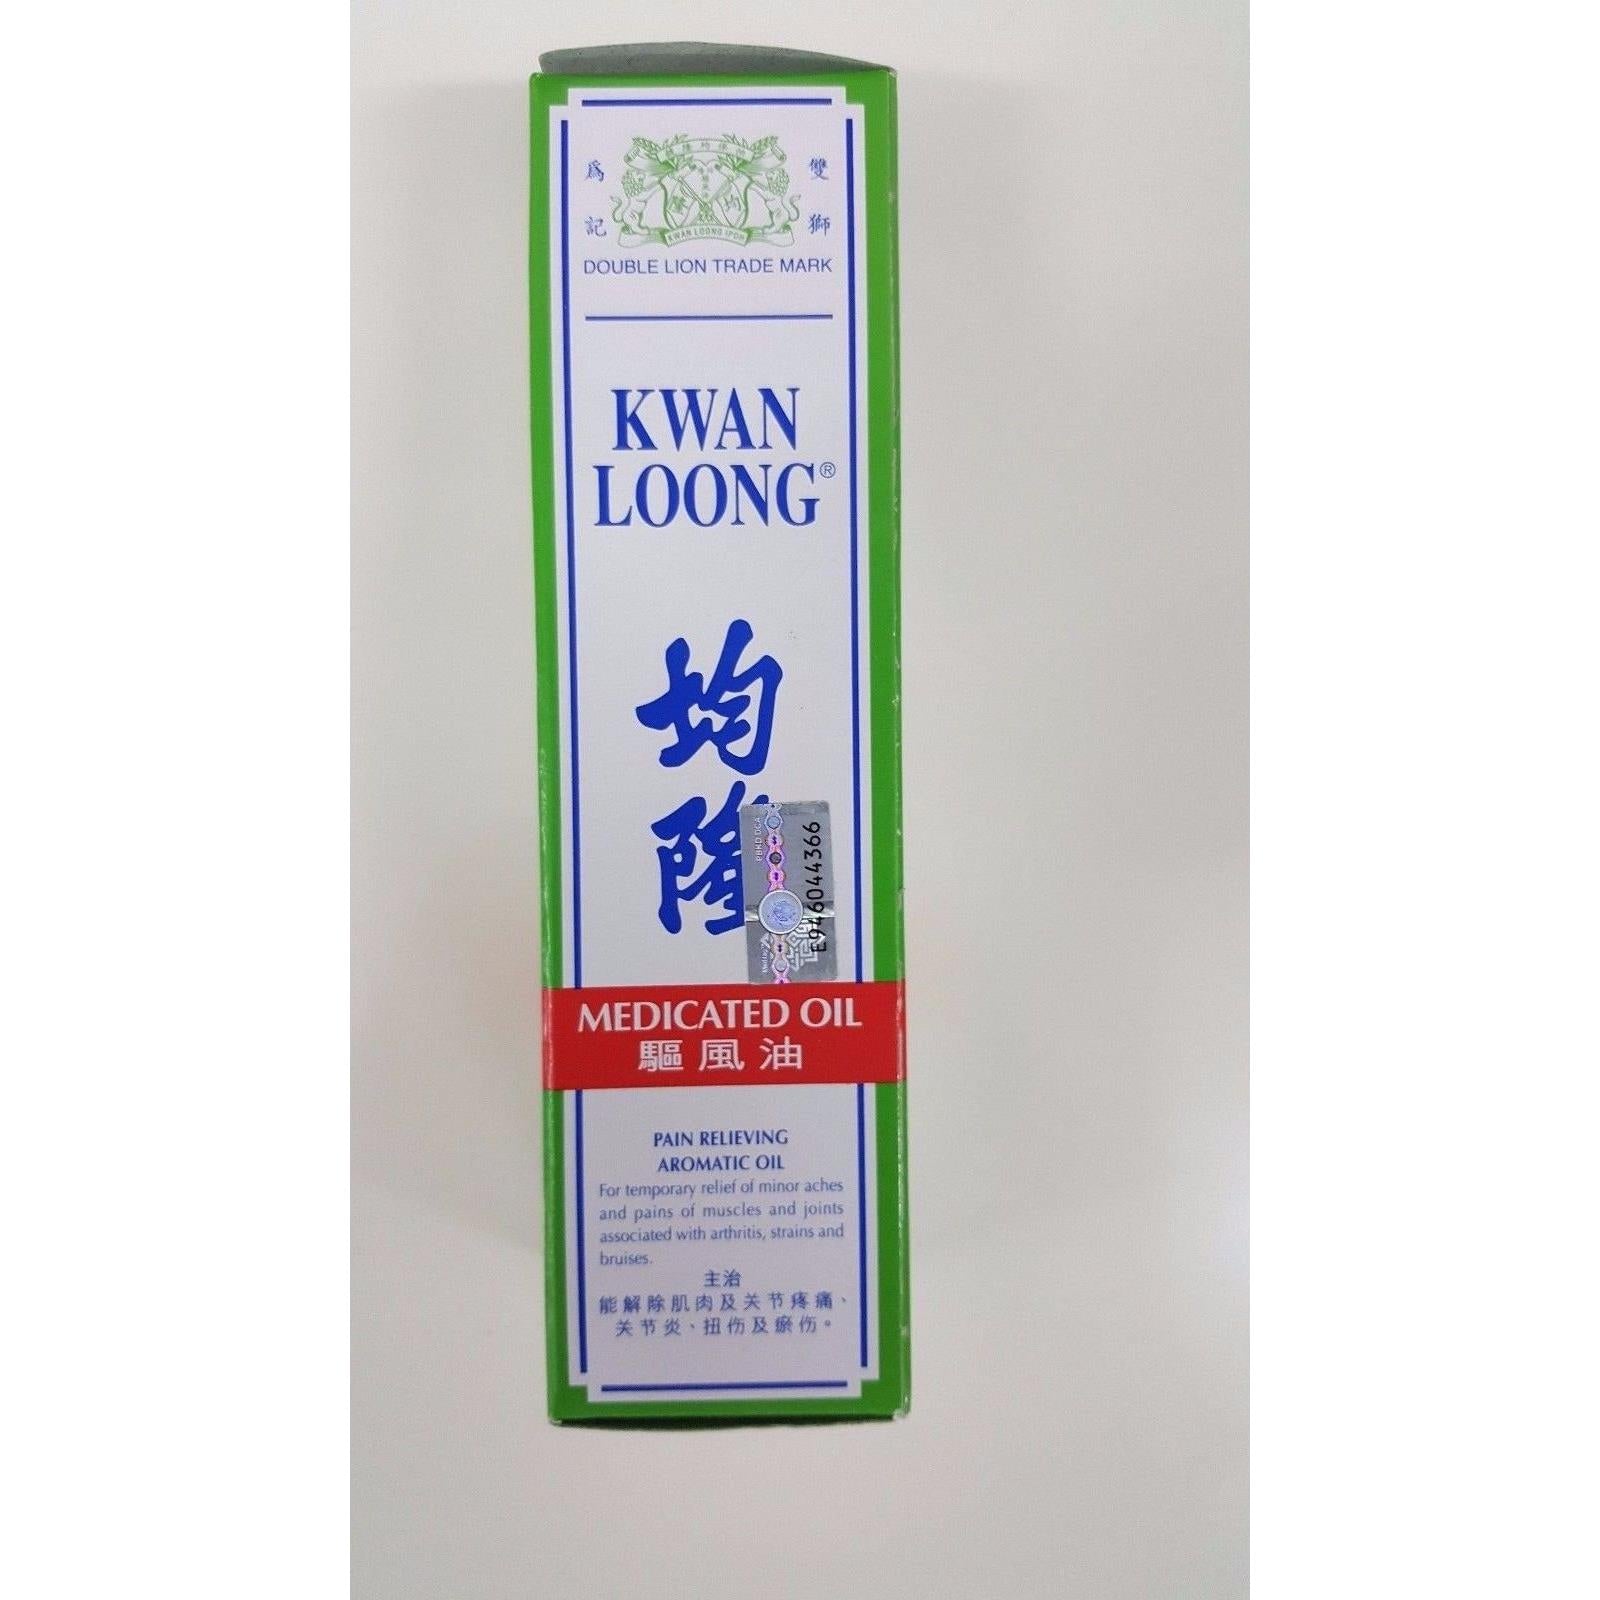 x2 Pieces Singapore Kwan Loong Medicated Oil Fast Pain Relief Aromatic Oil 28ml 均隆驅風油